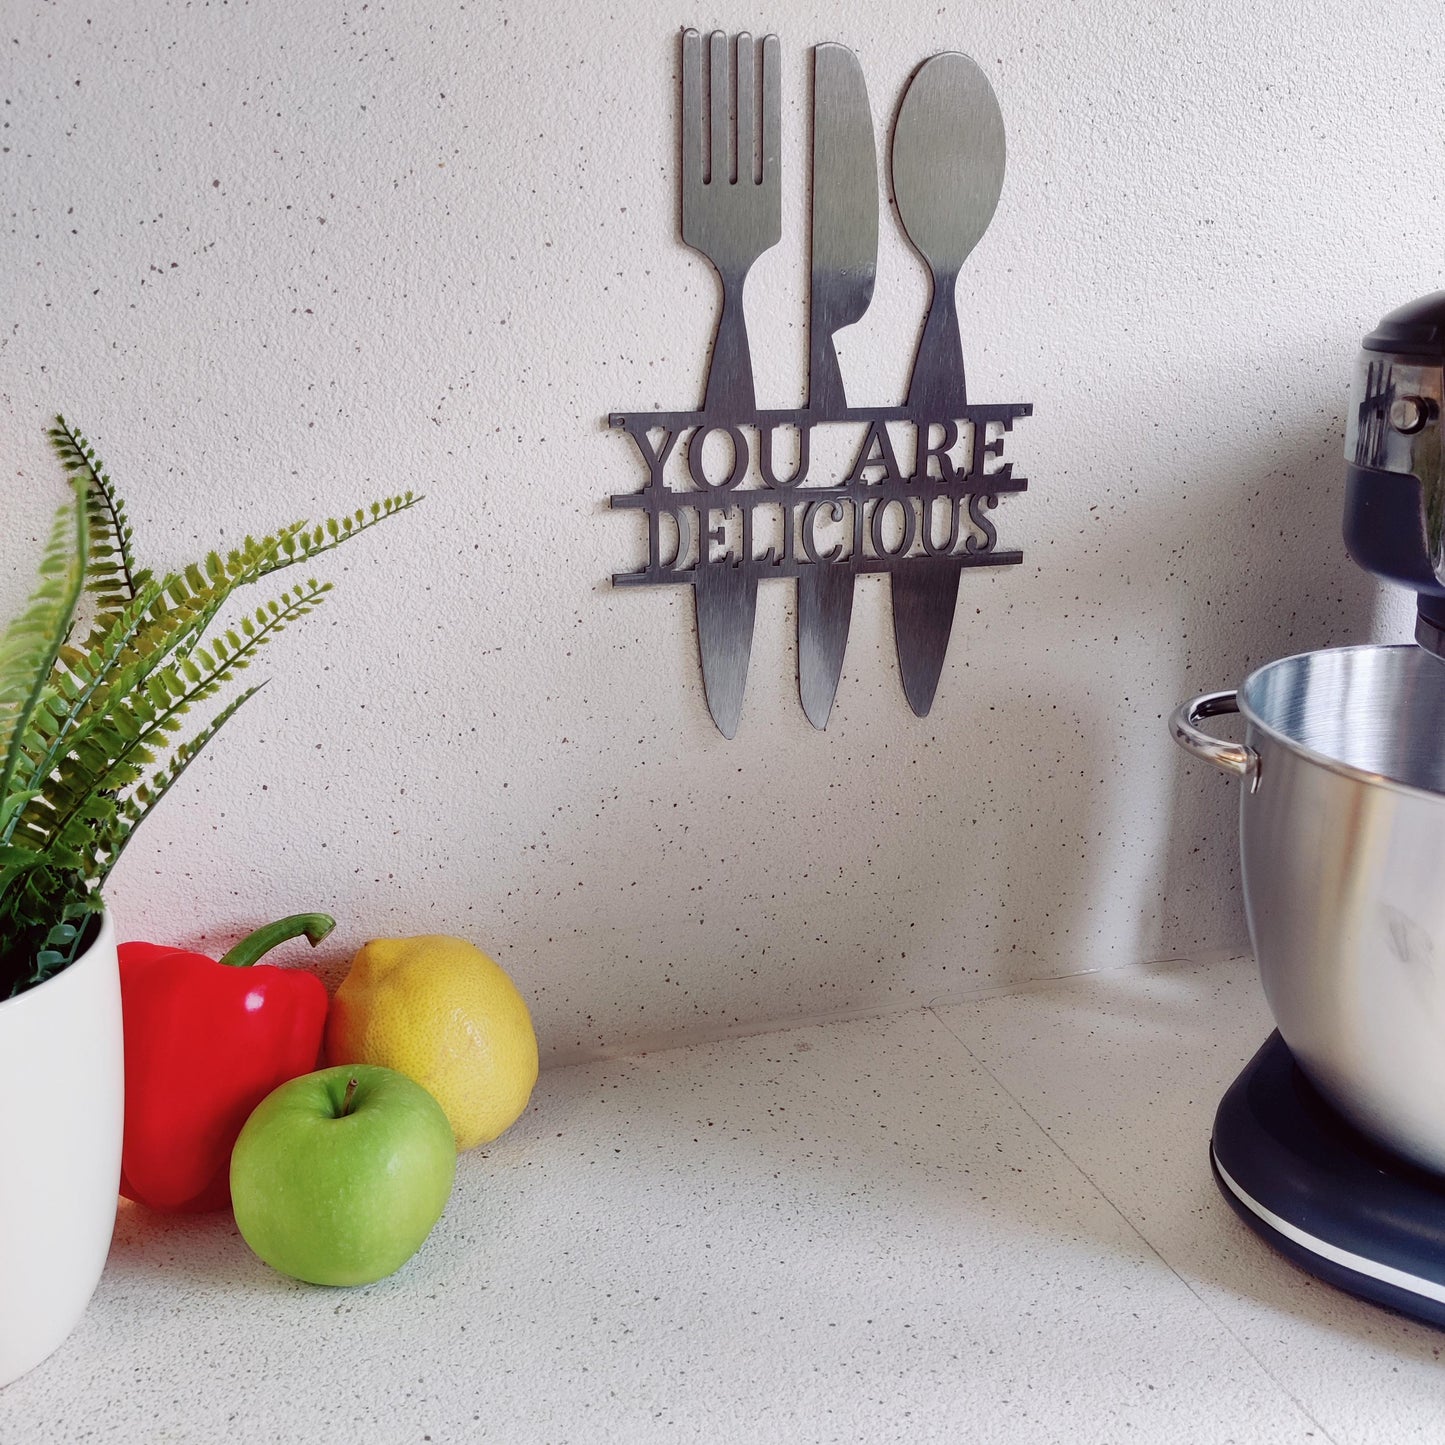 Metal wall art sign for the kitchen hanging on the wall as kitchen decor in the color silver